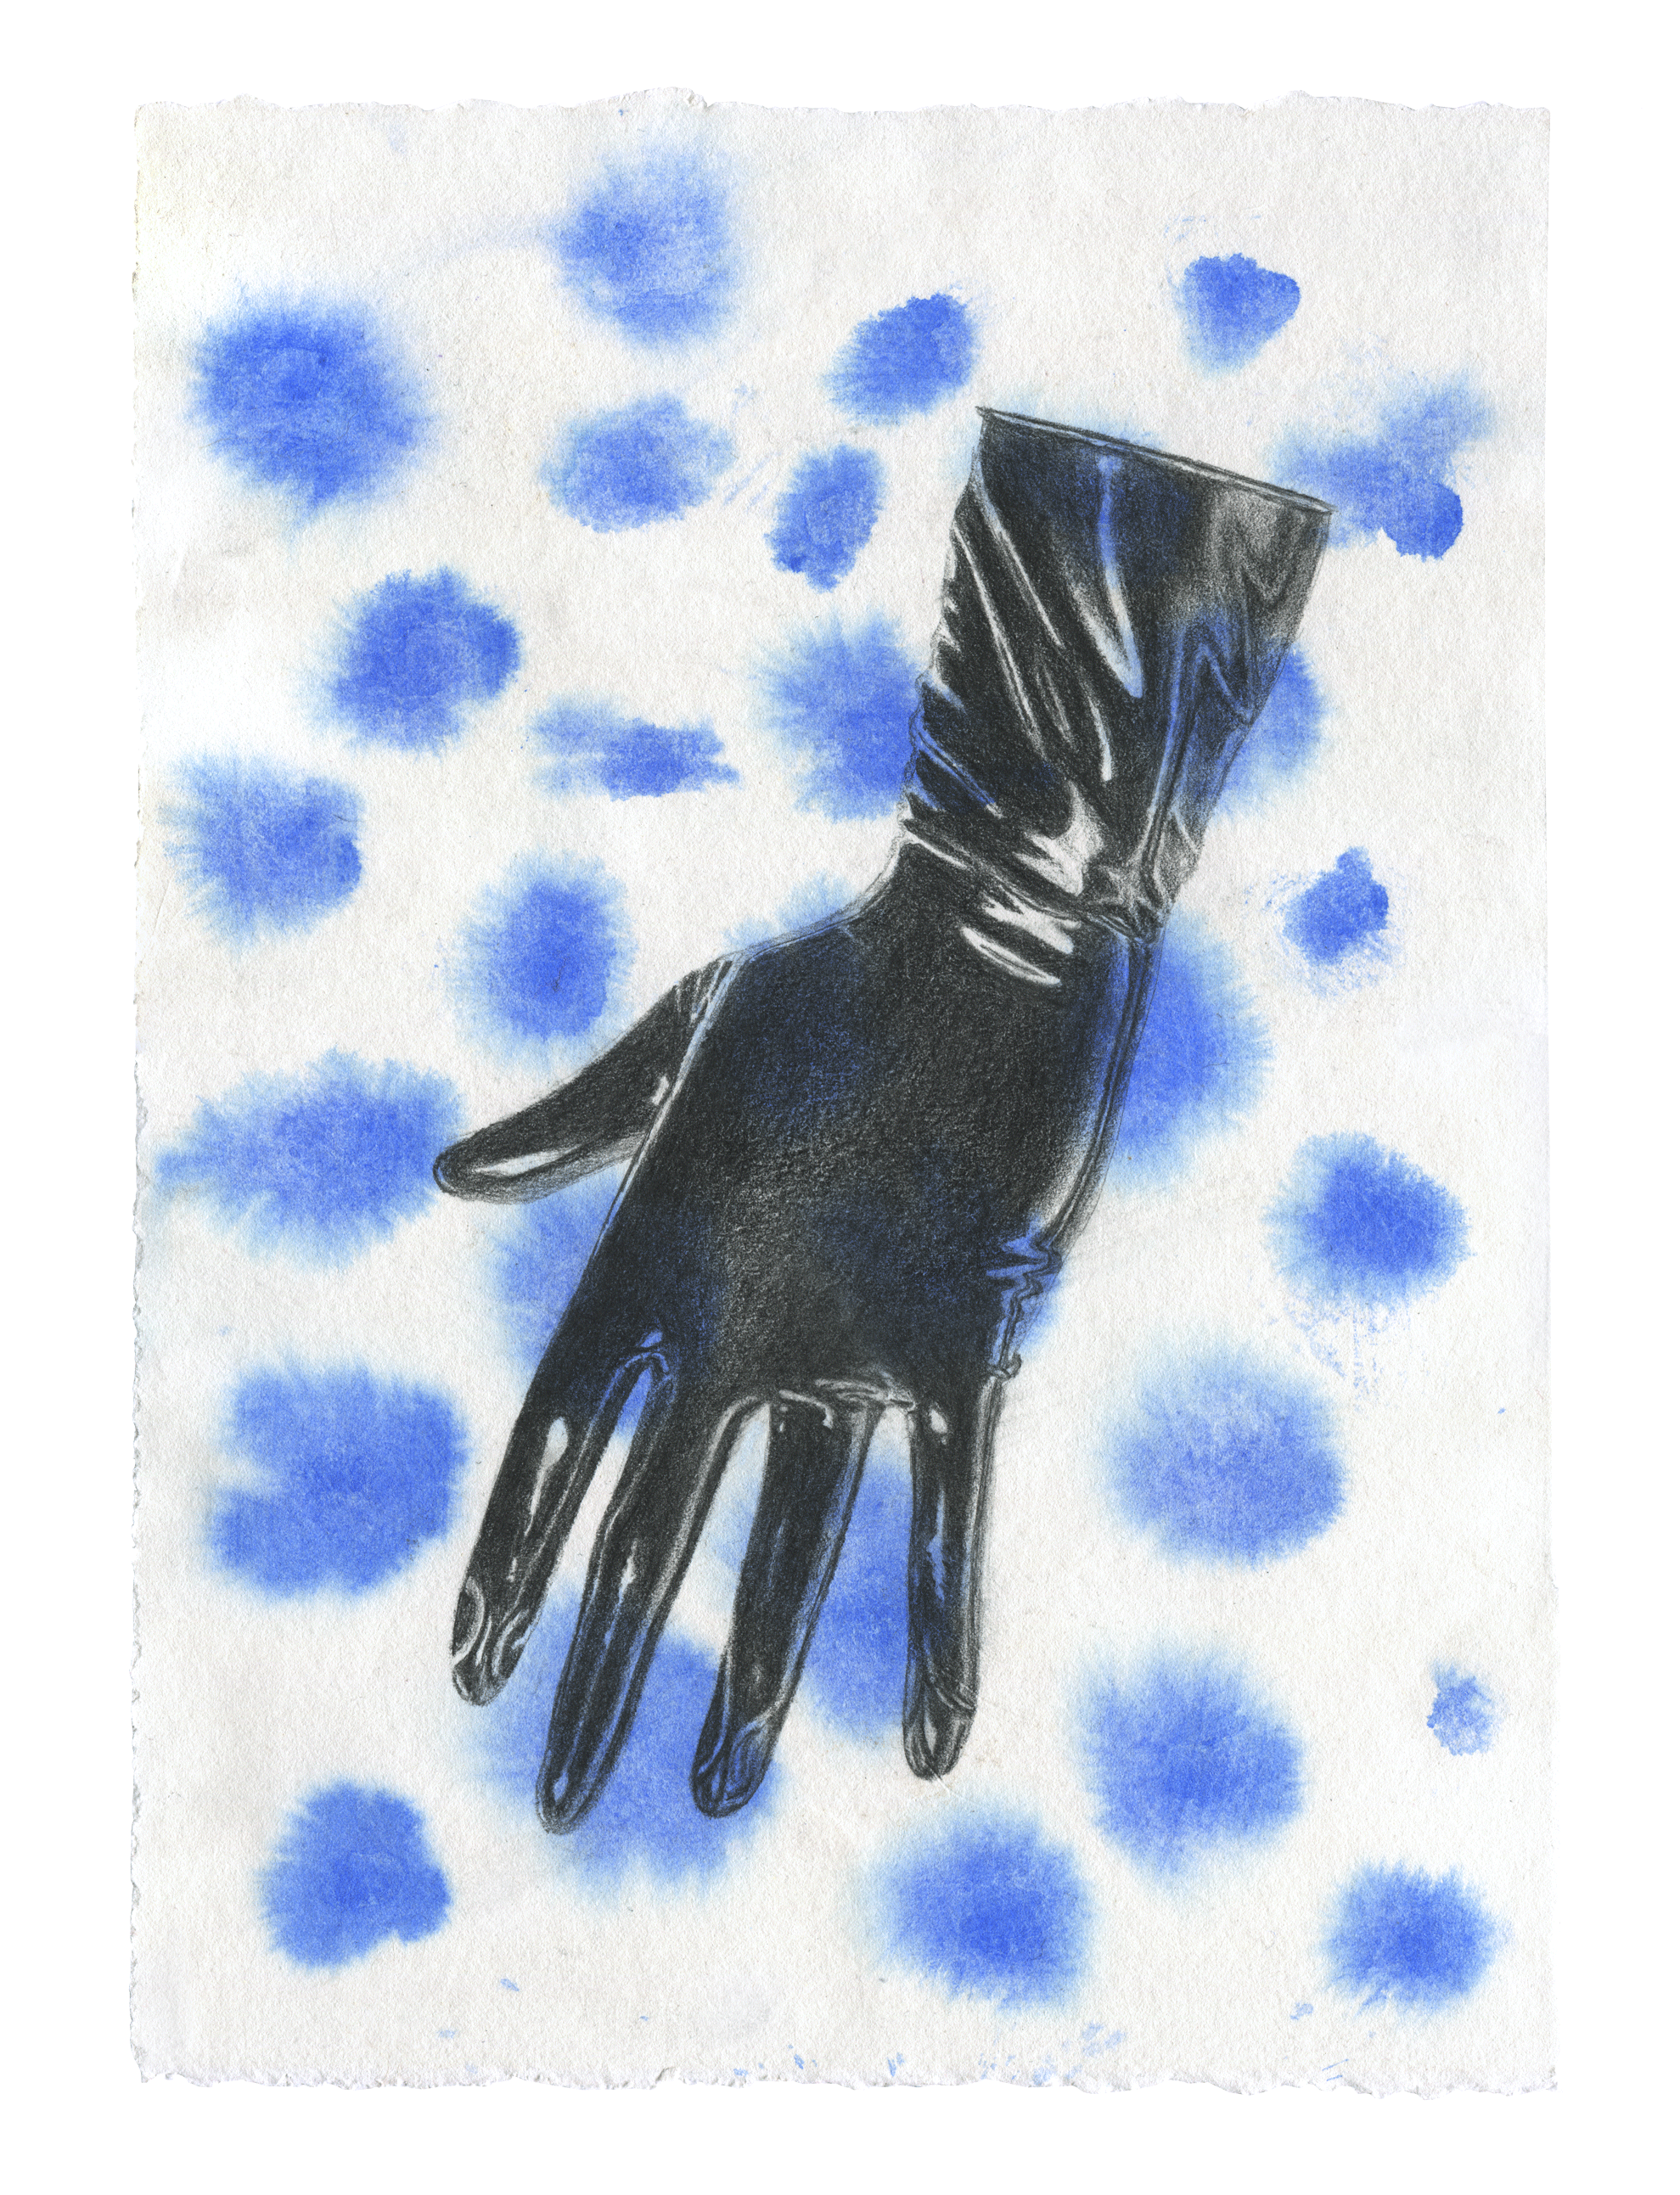   The Touch , Graphite and Watercolor on Paper, 2020, 9 x 12 in  